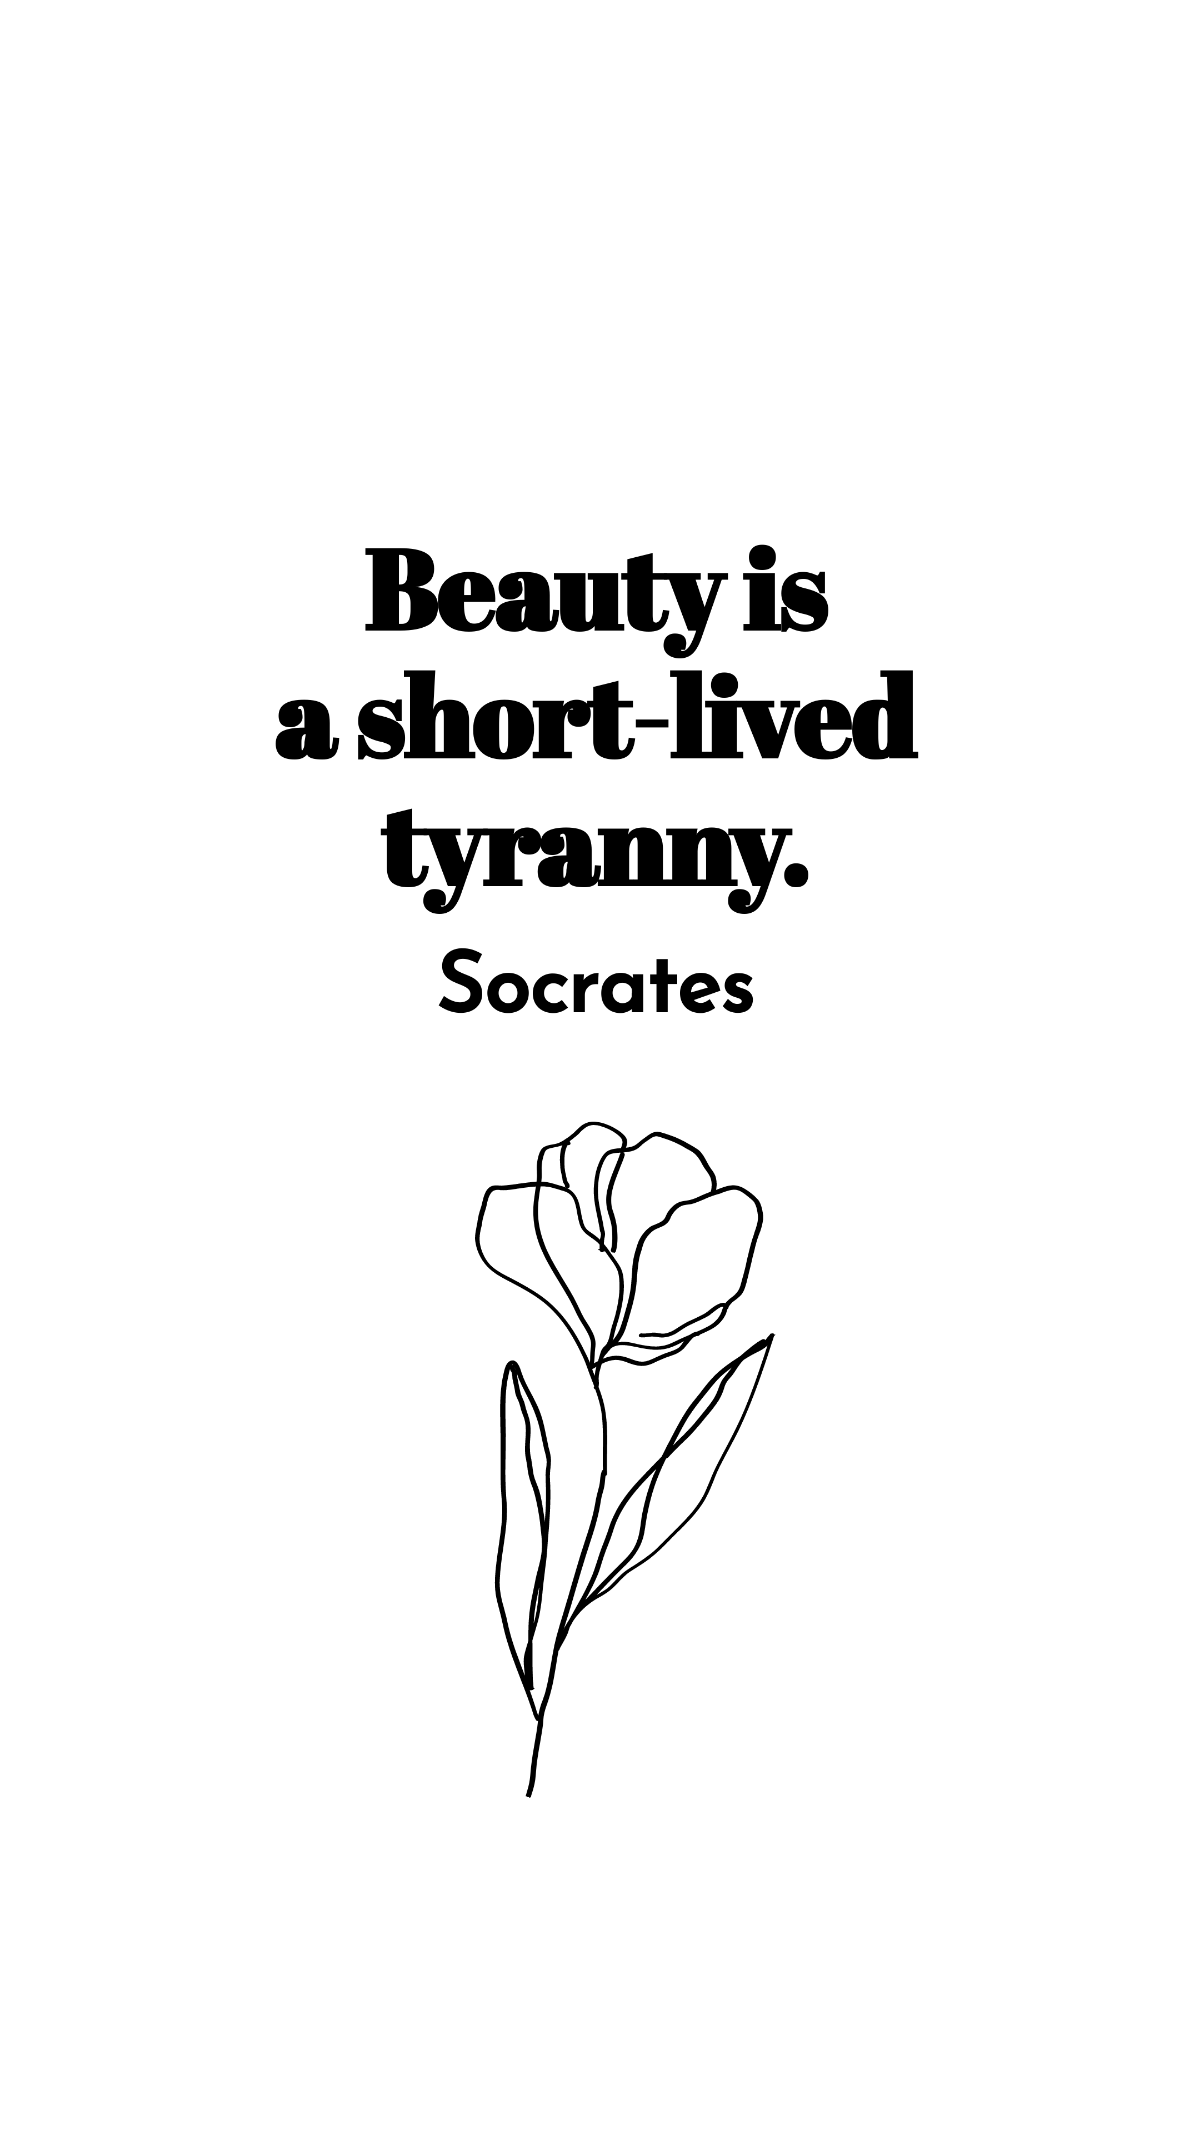 Free Socrates - Beauty is a short-lived tyranny. Template